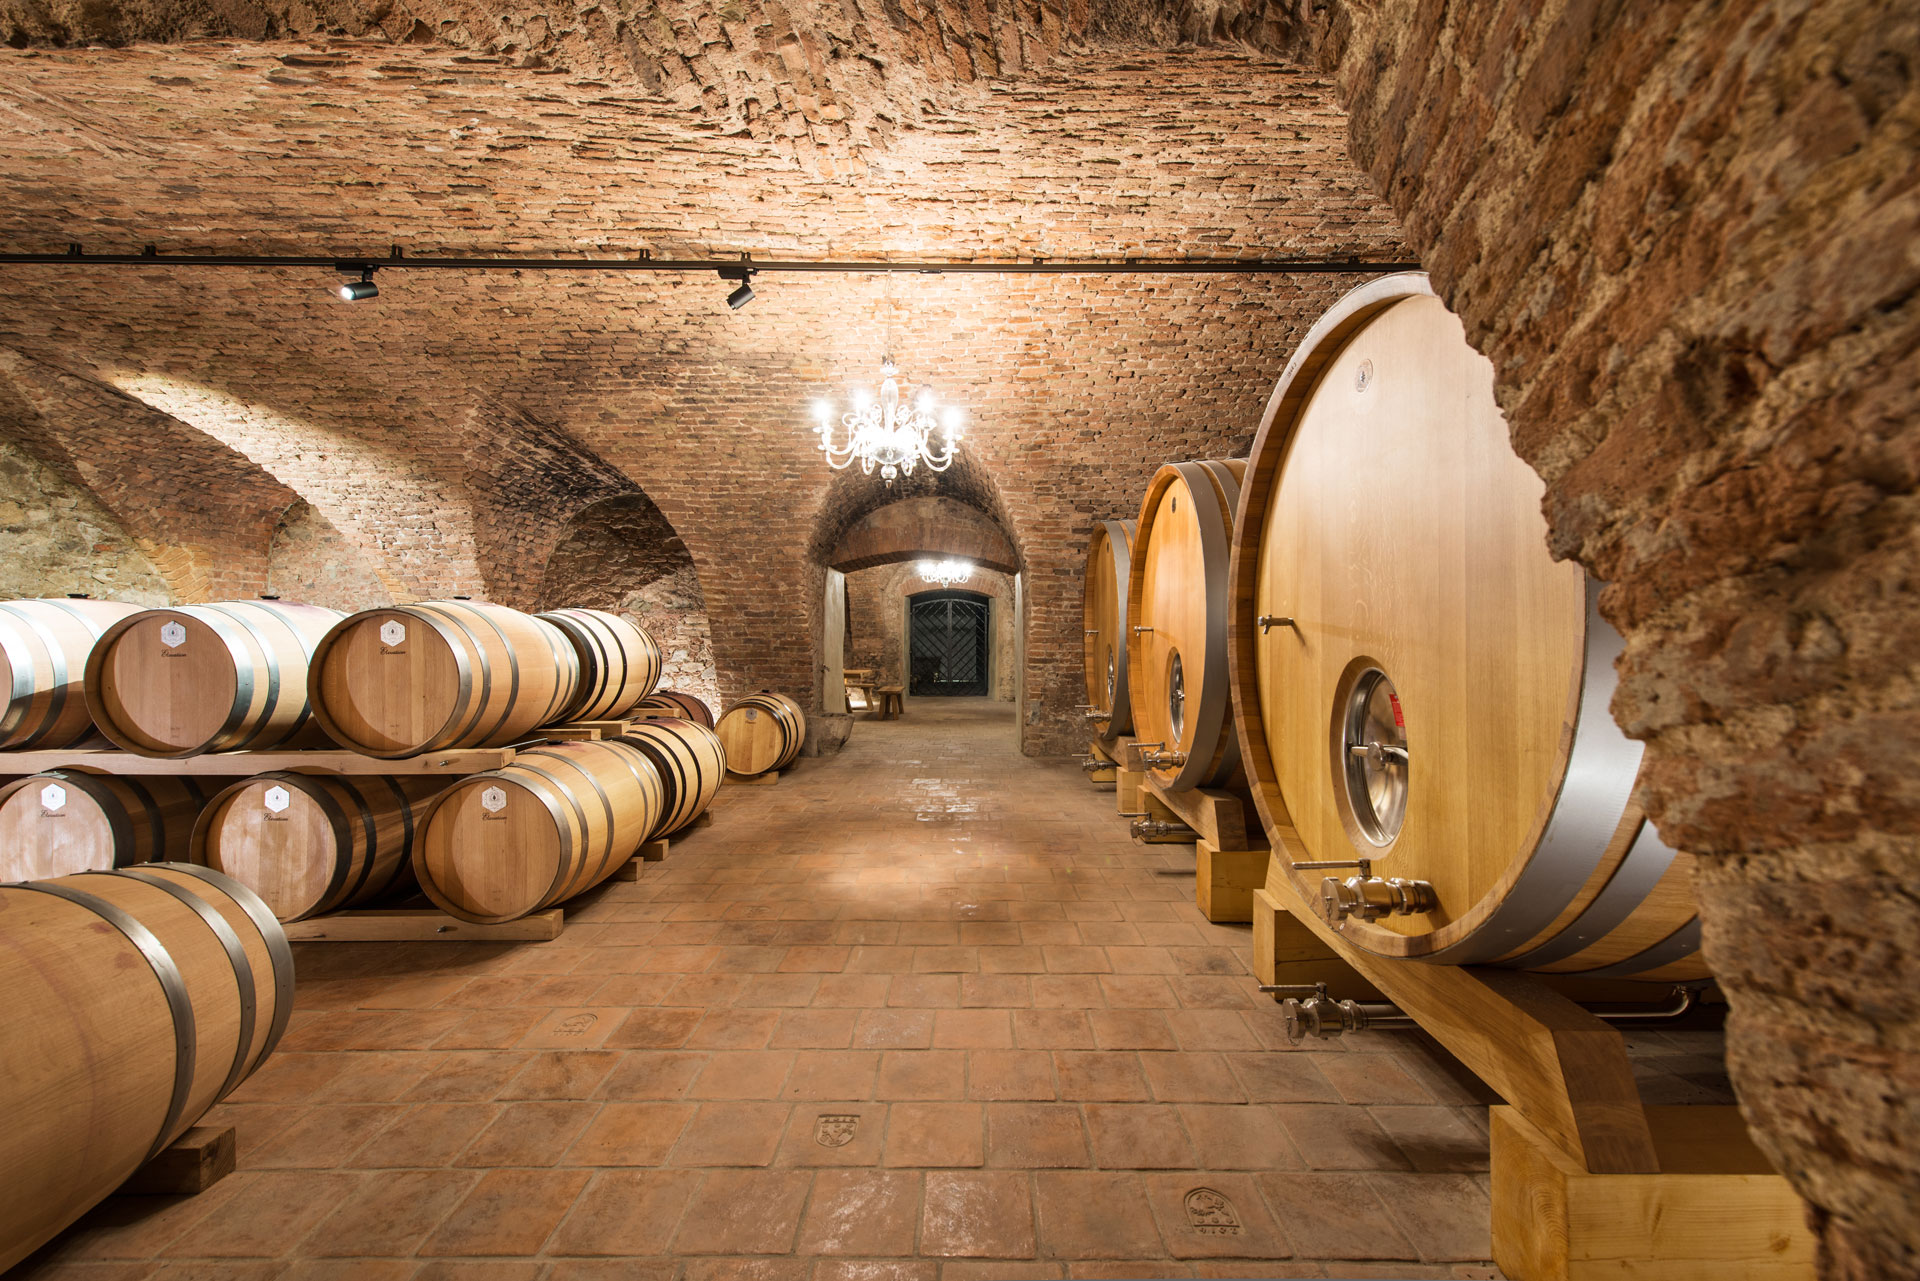 Vinag Wine Cellar in Slovenia, Europe | Wineries - Rated 0.8